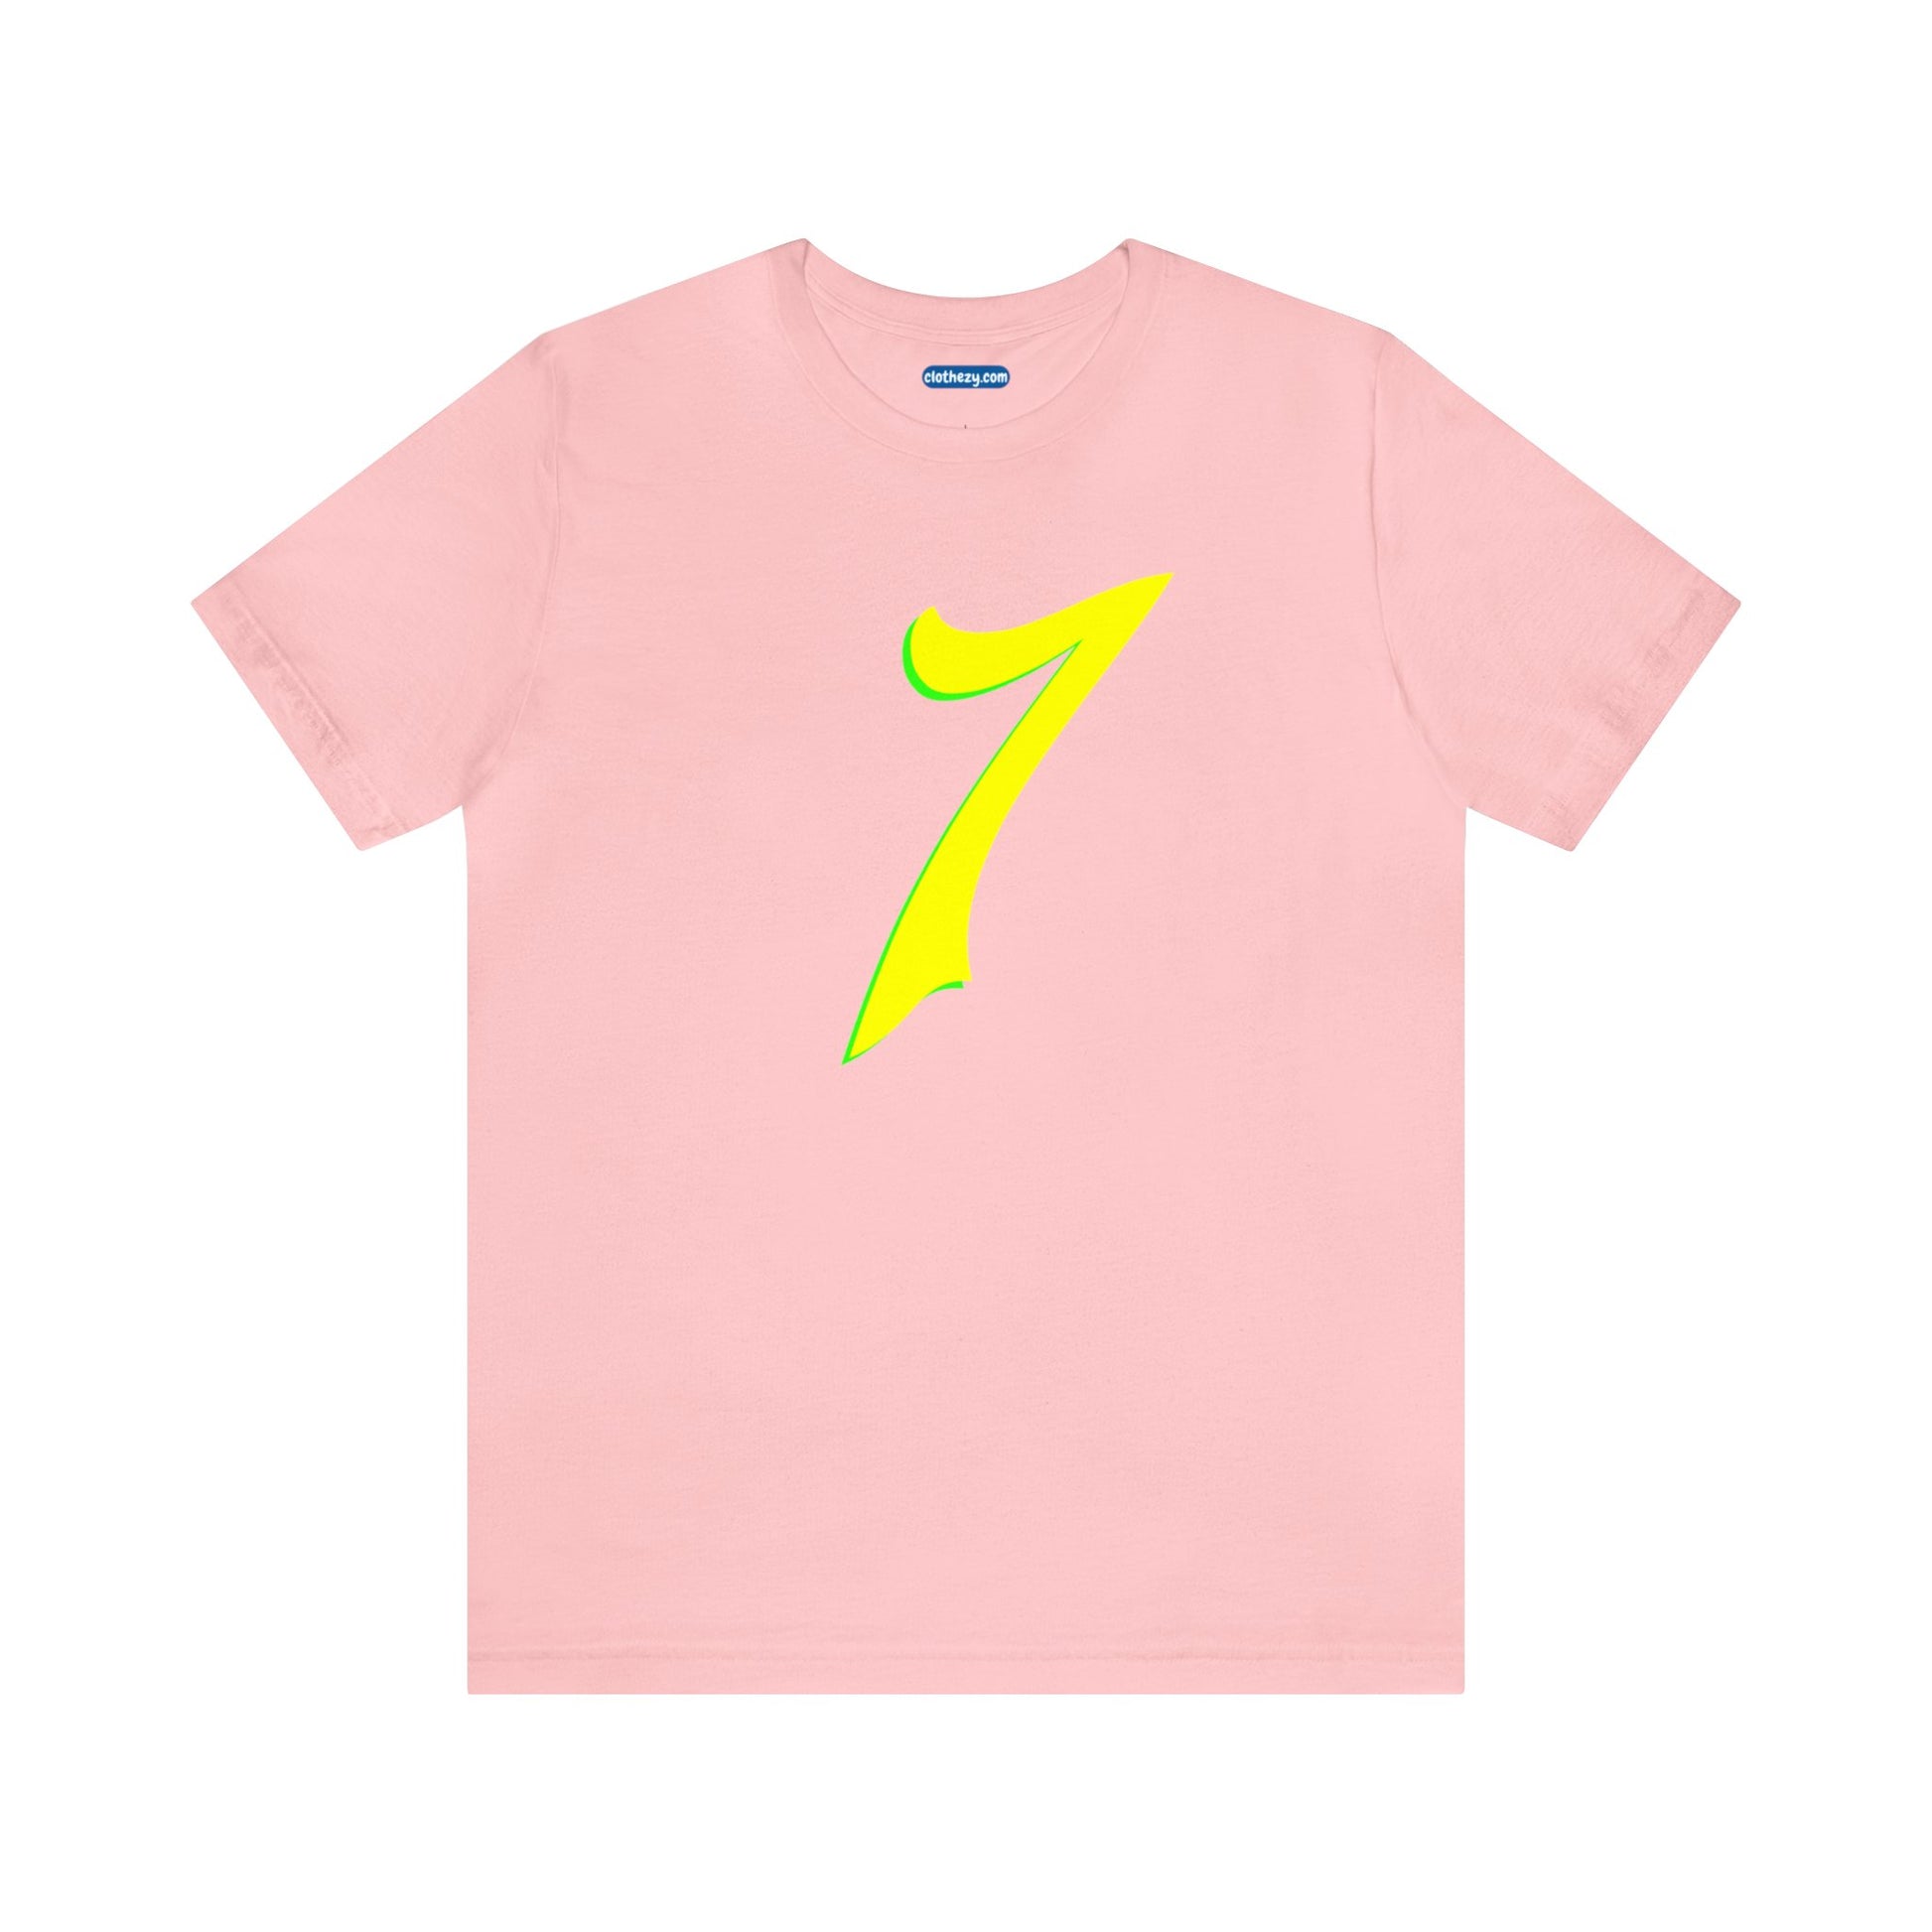 Number 7 Design - Soft Cotton Tee for birthdays and celebrations, Gift for friends and family, Multiple Options by clothezy.com in Pink Size Small - Buy Now